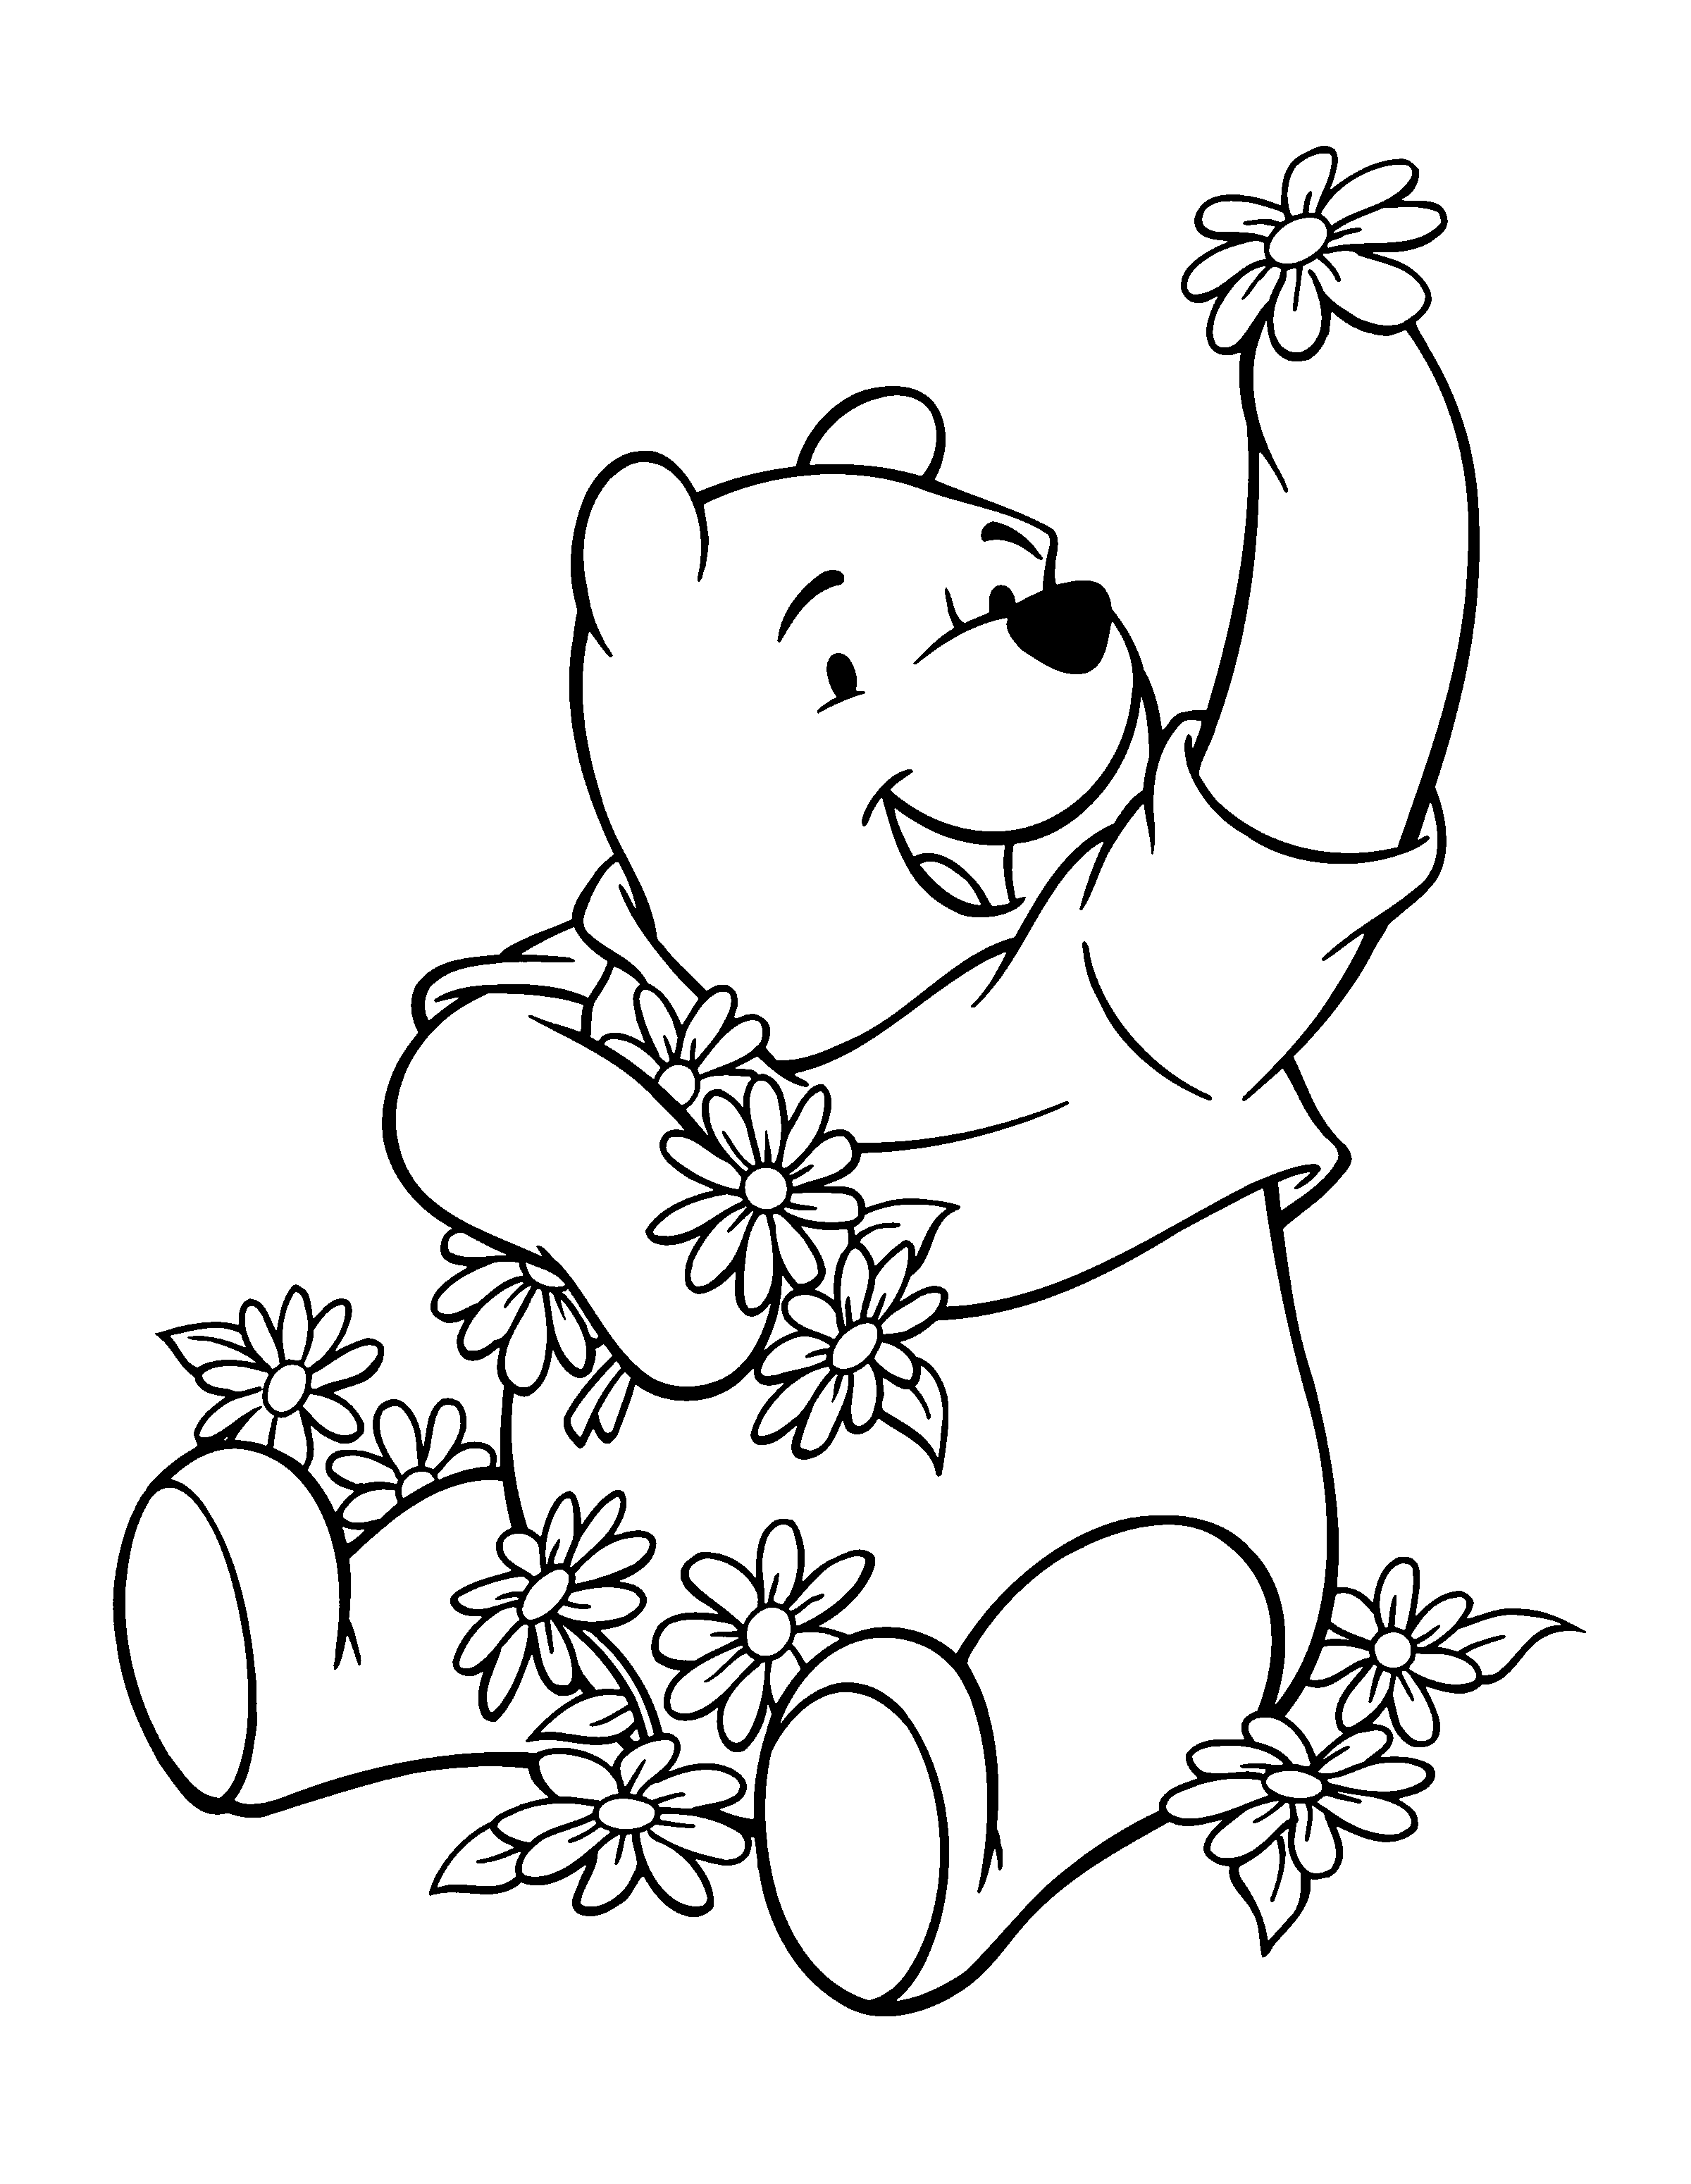 free winnie the pooh coloring pages free printable winnie the pooh coloring pages for kids the winnie free pages pooh coloring 